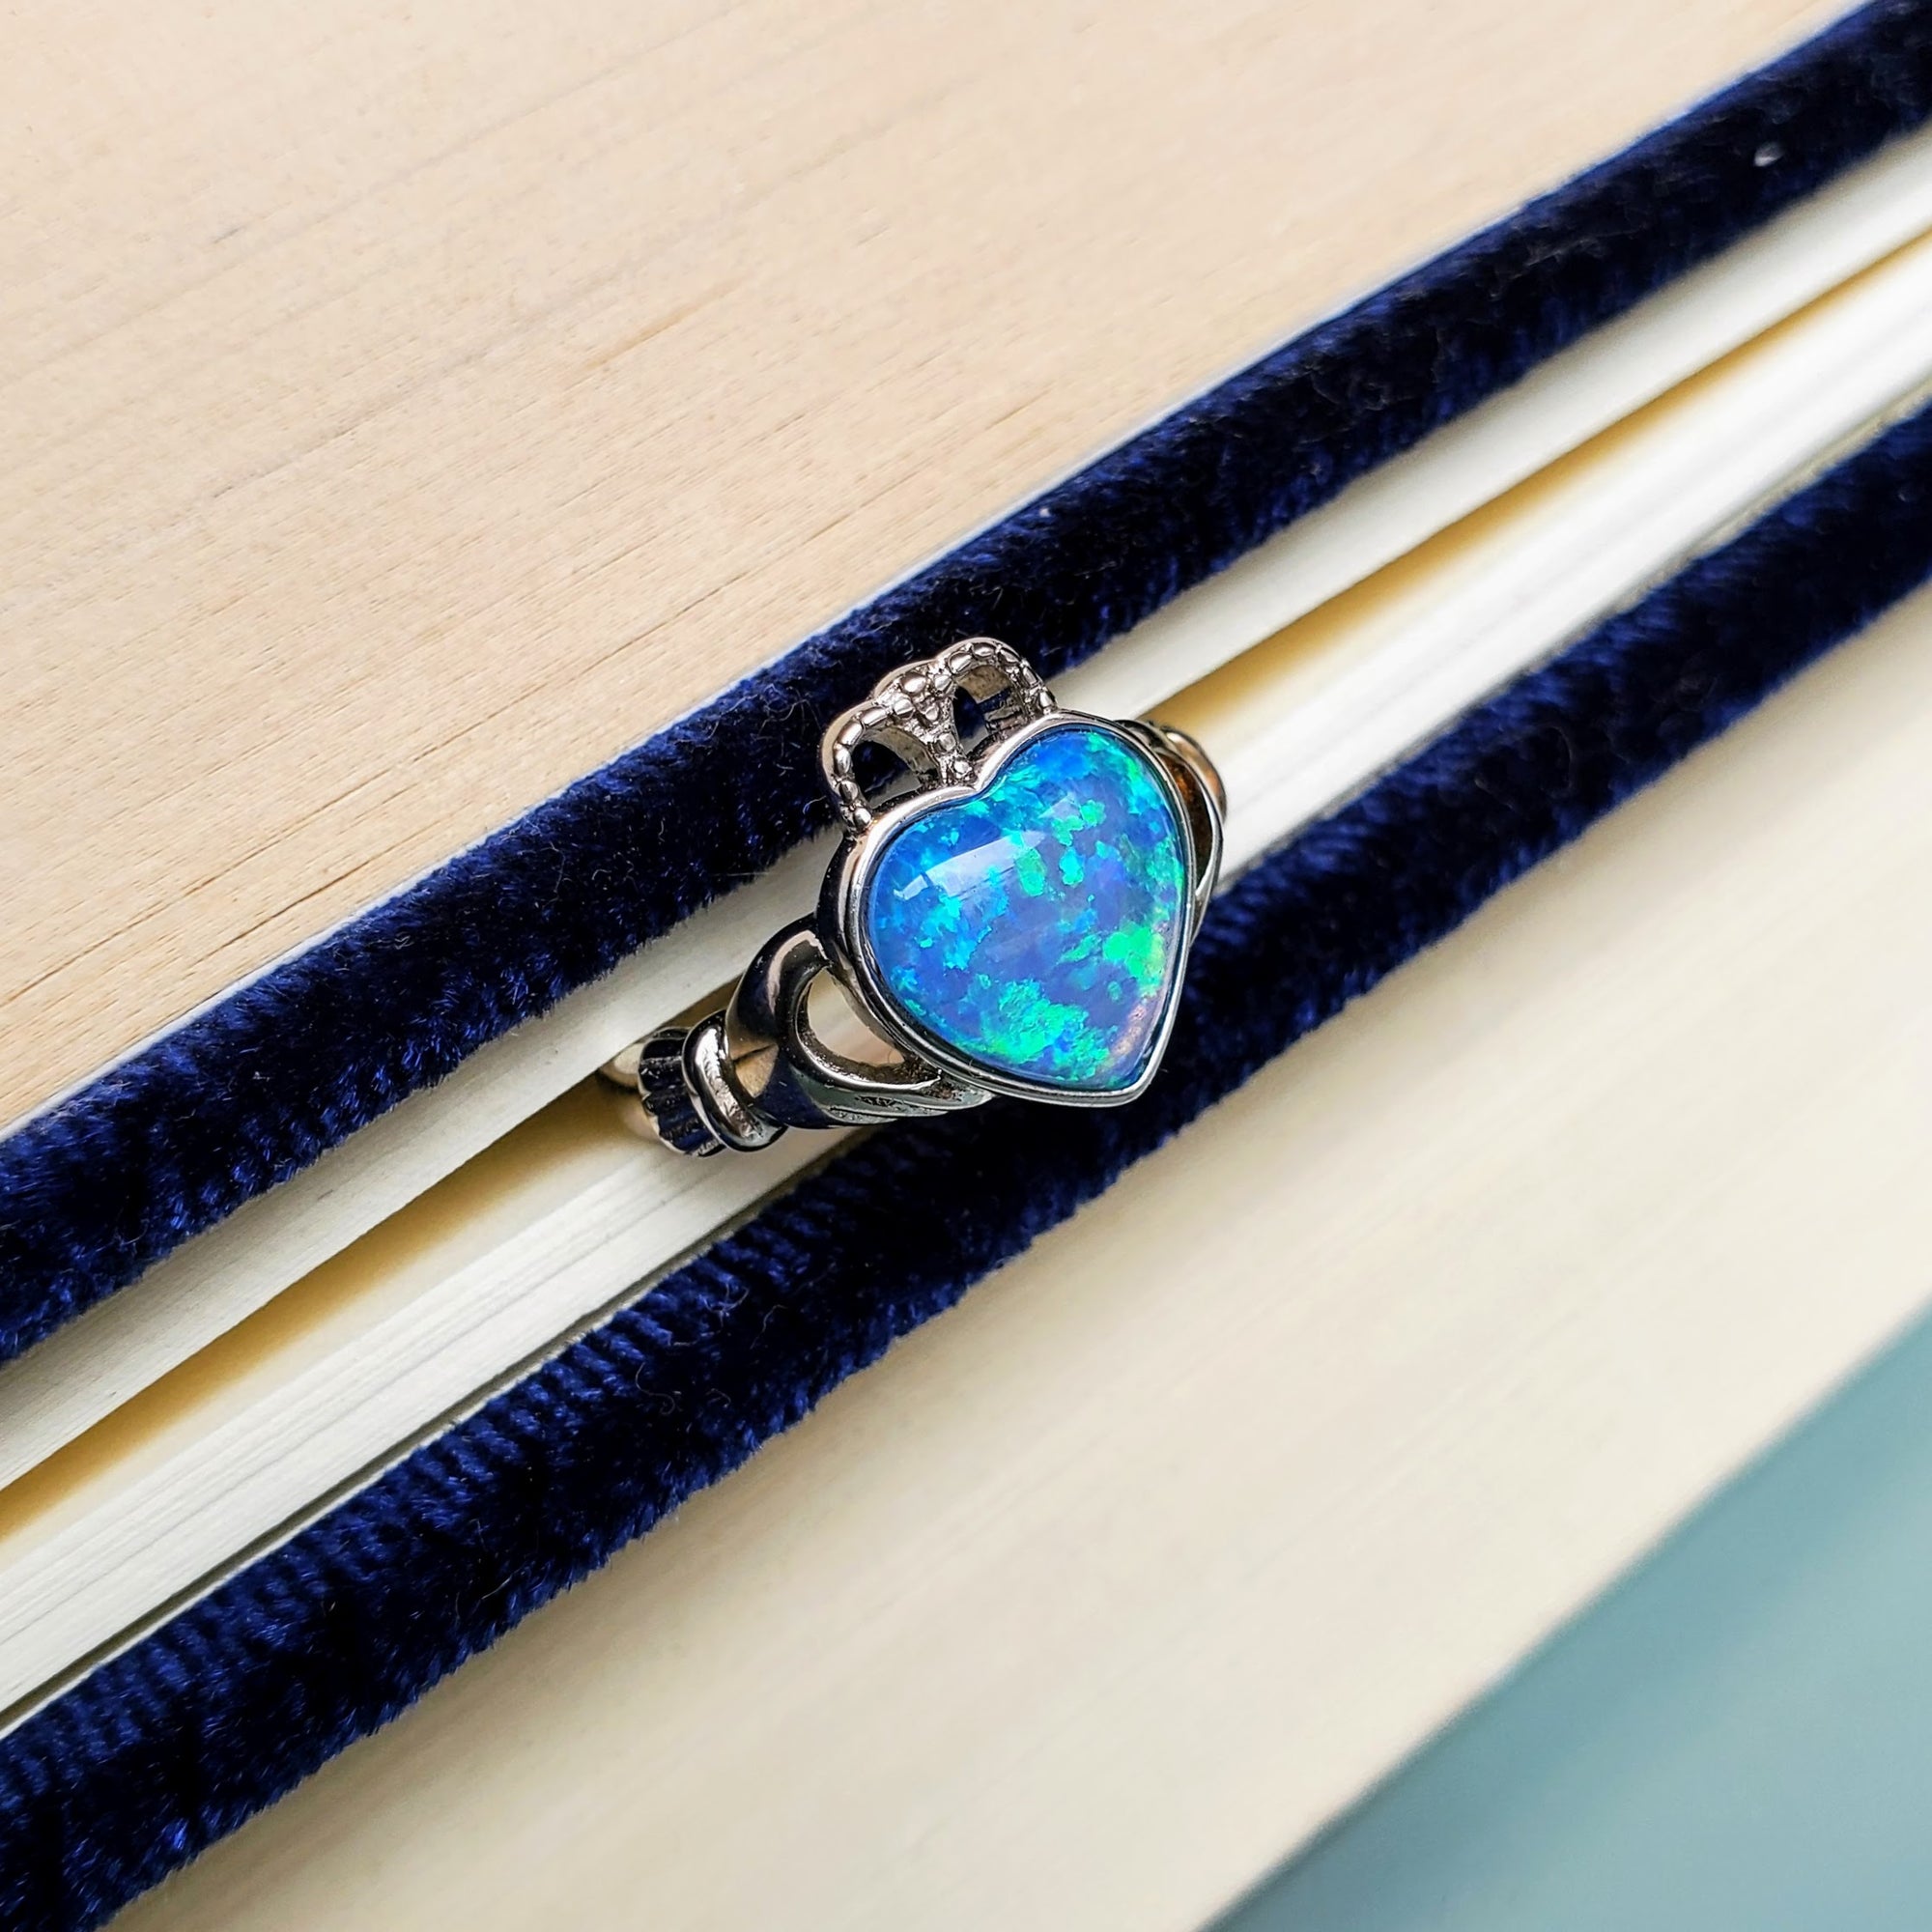 The Blue Heart Ring